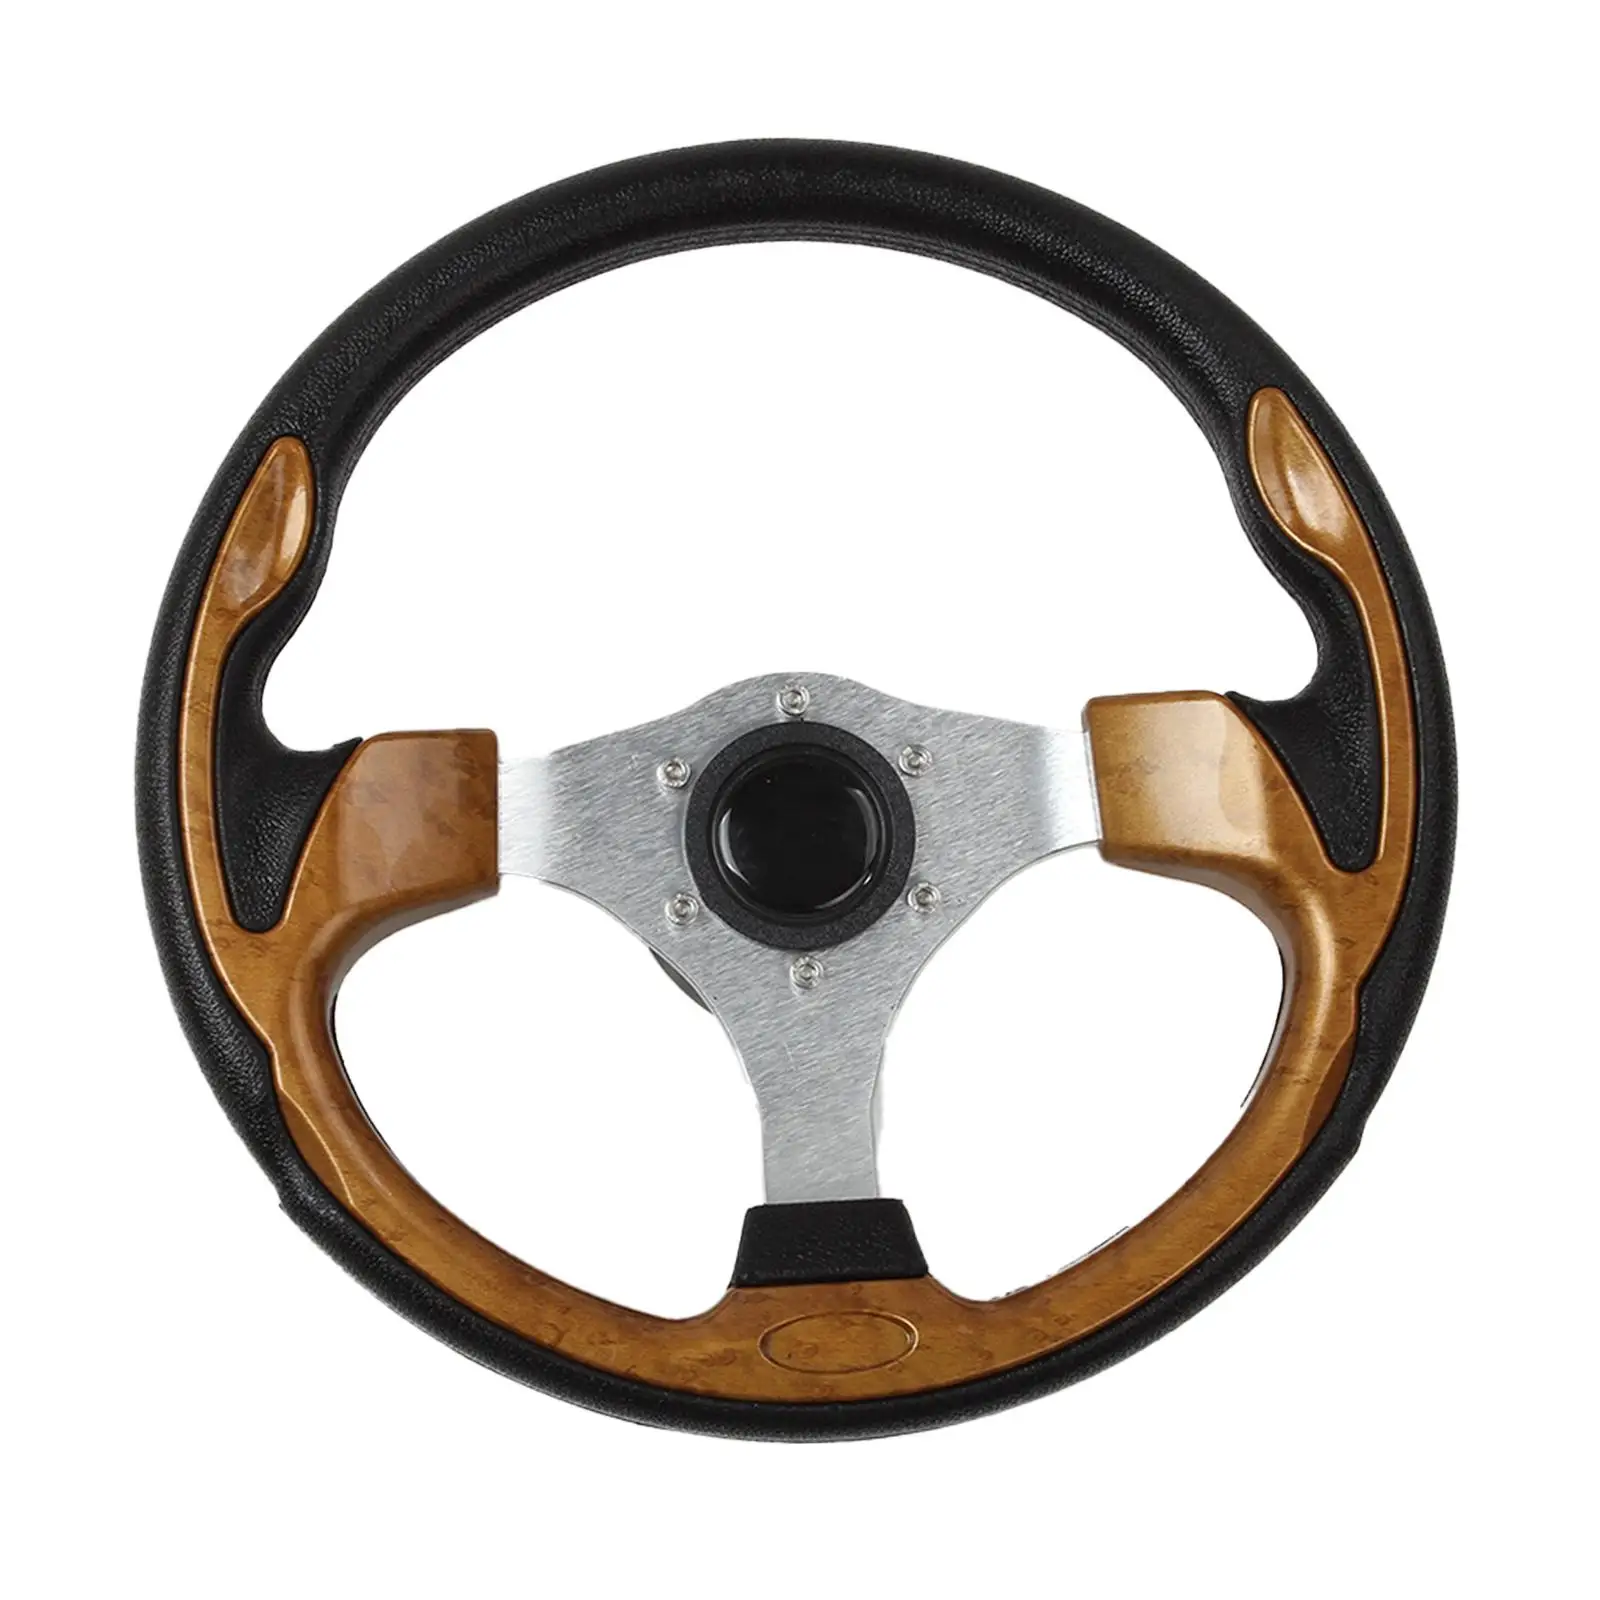 Marine Steering Wheel Easily Install Polished Marine Steering System 350mm for Marine Boats Pontoon Boats Vessels Fittings